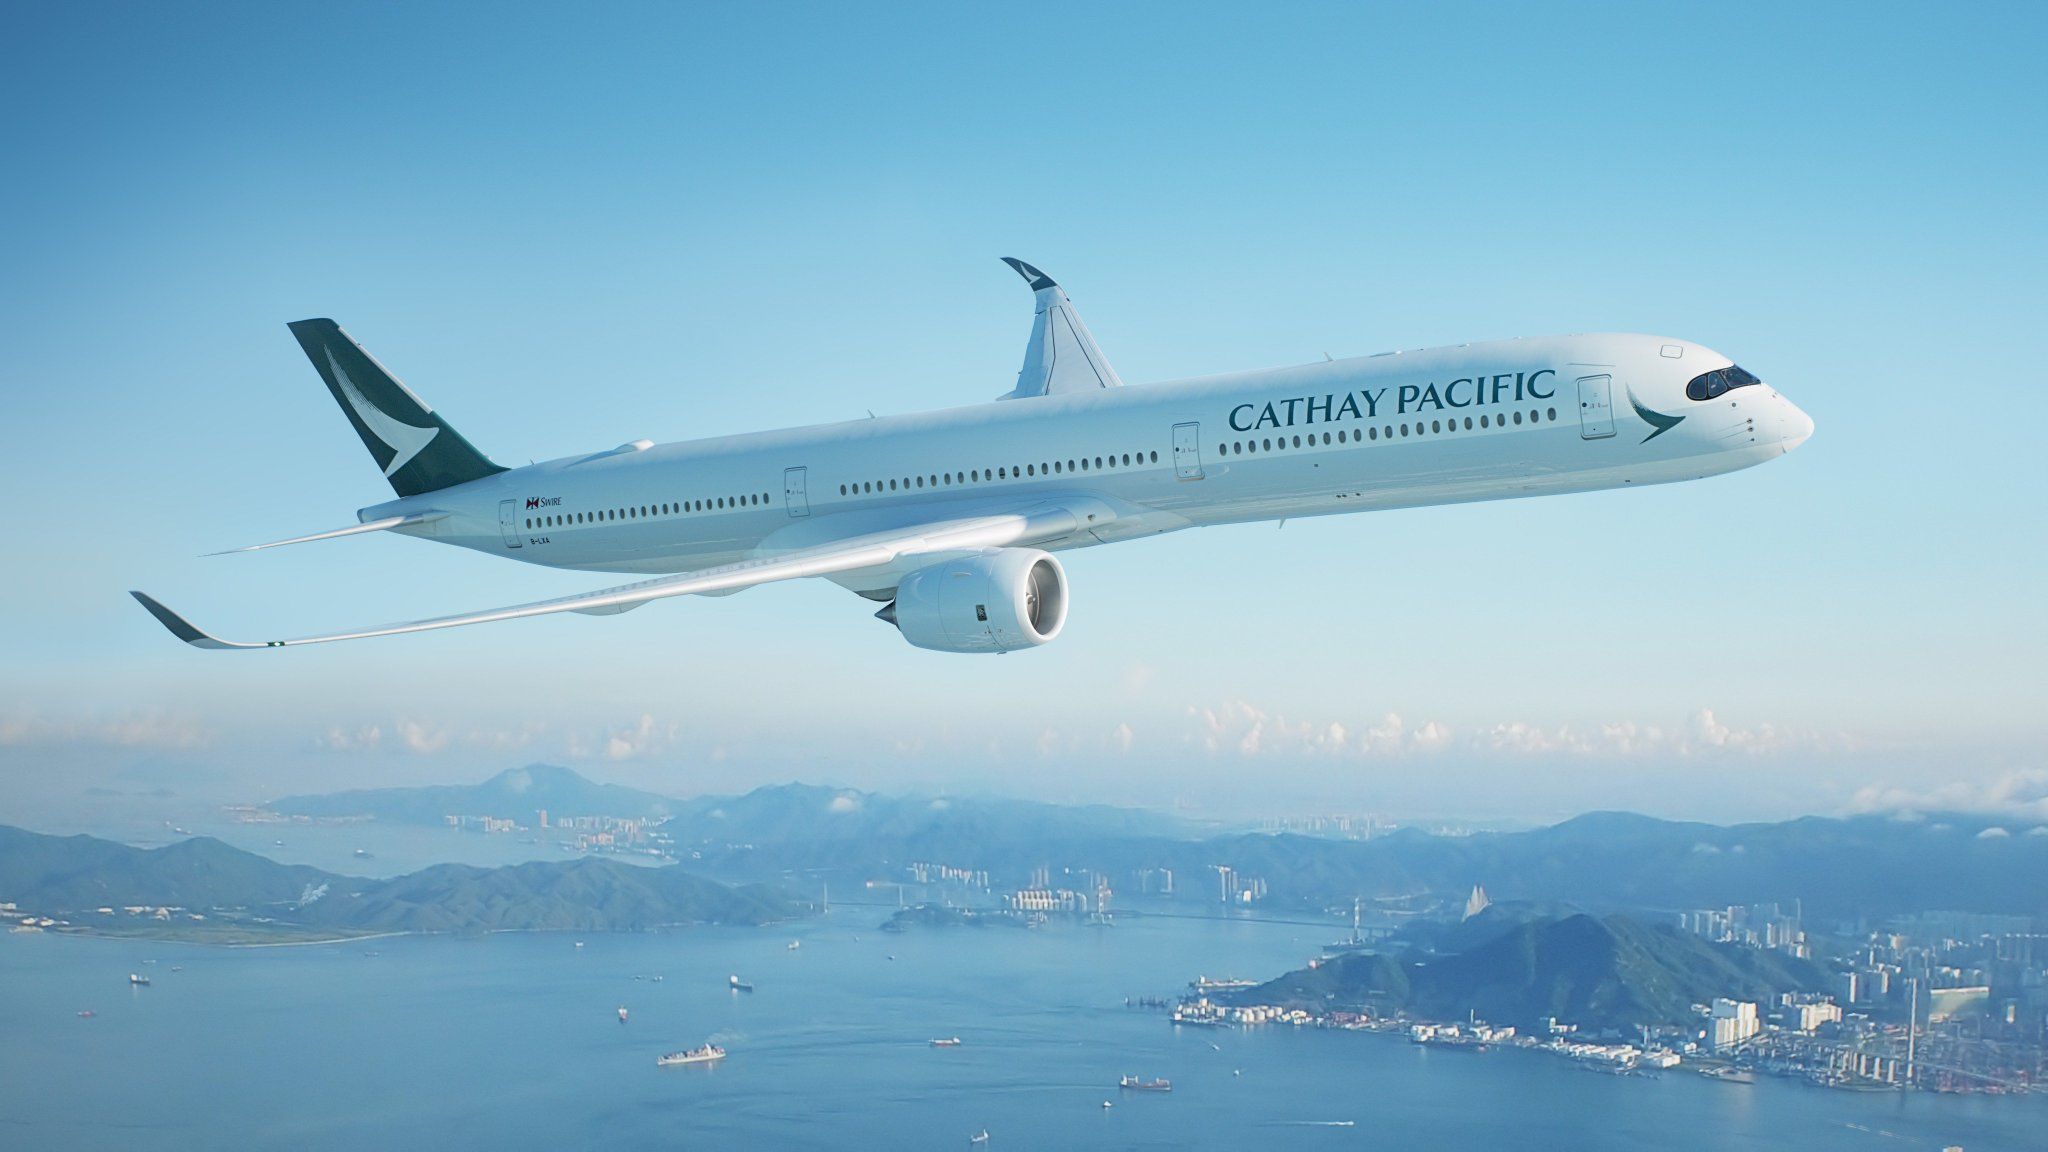 Cathay Pacific there's still work to be done